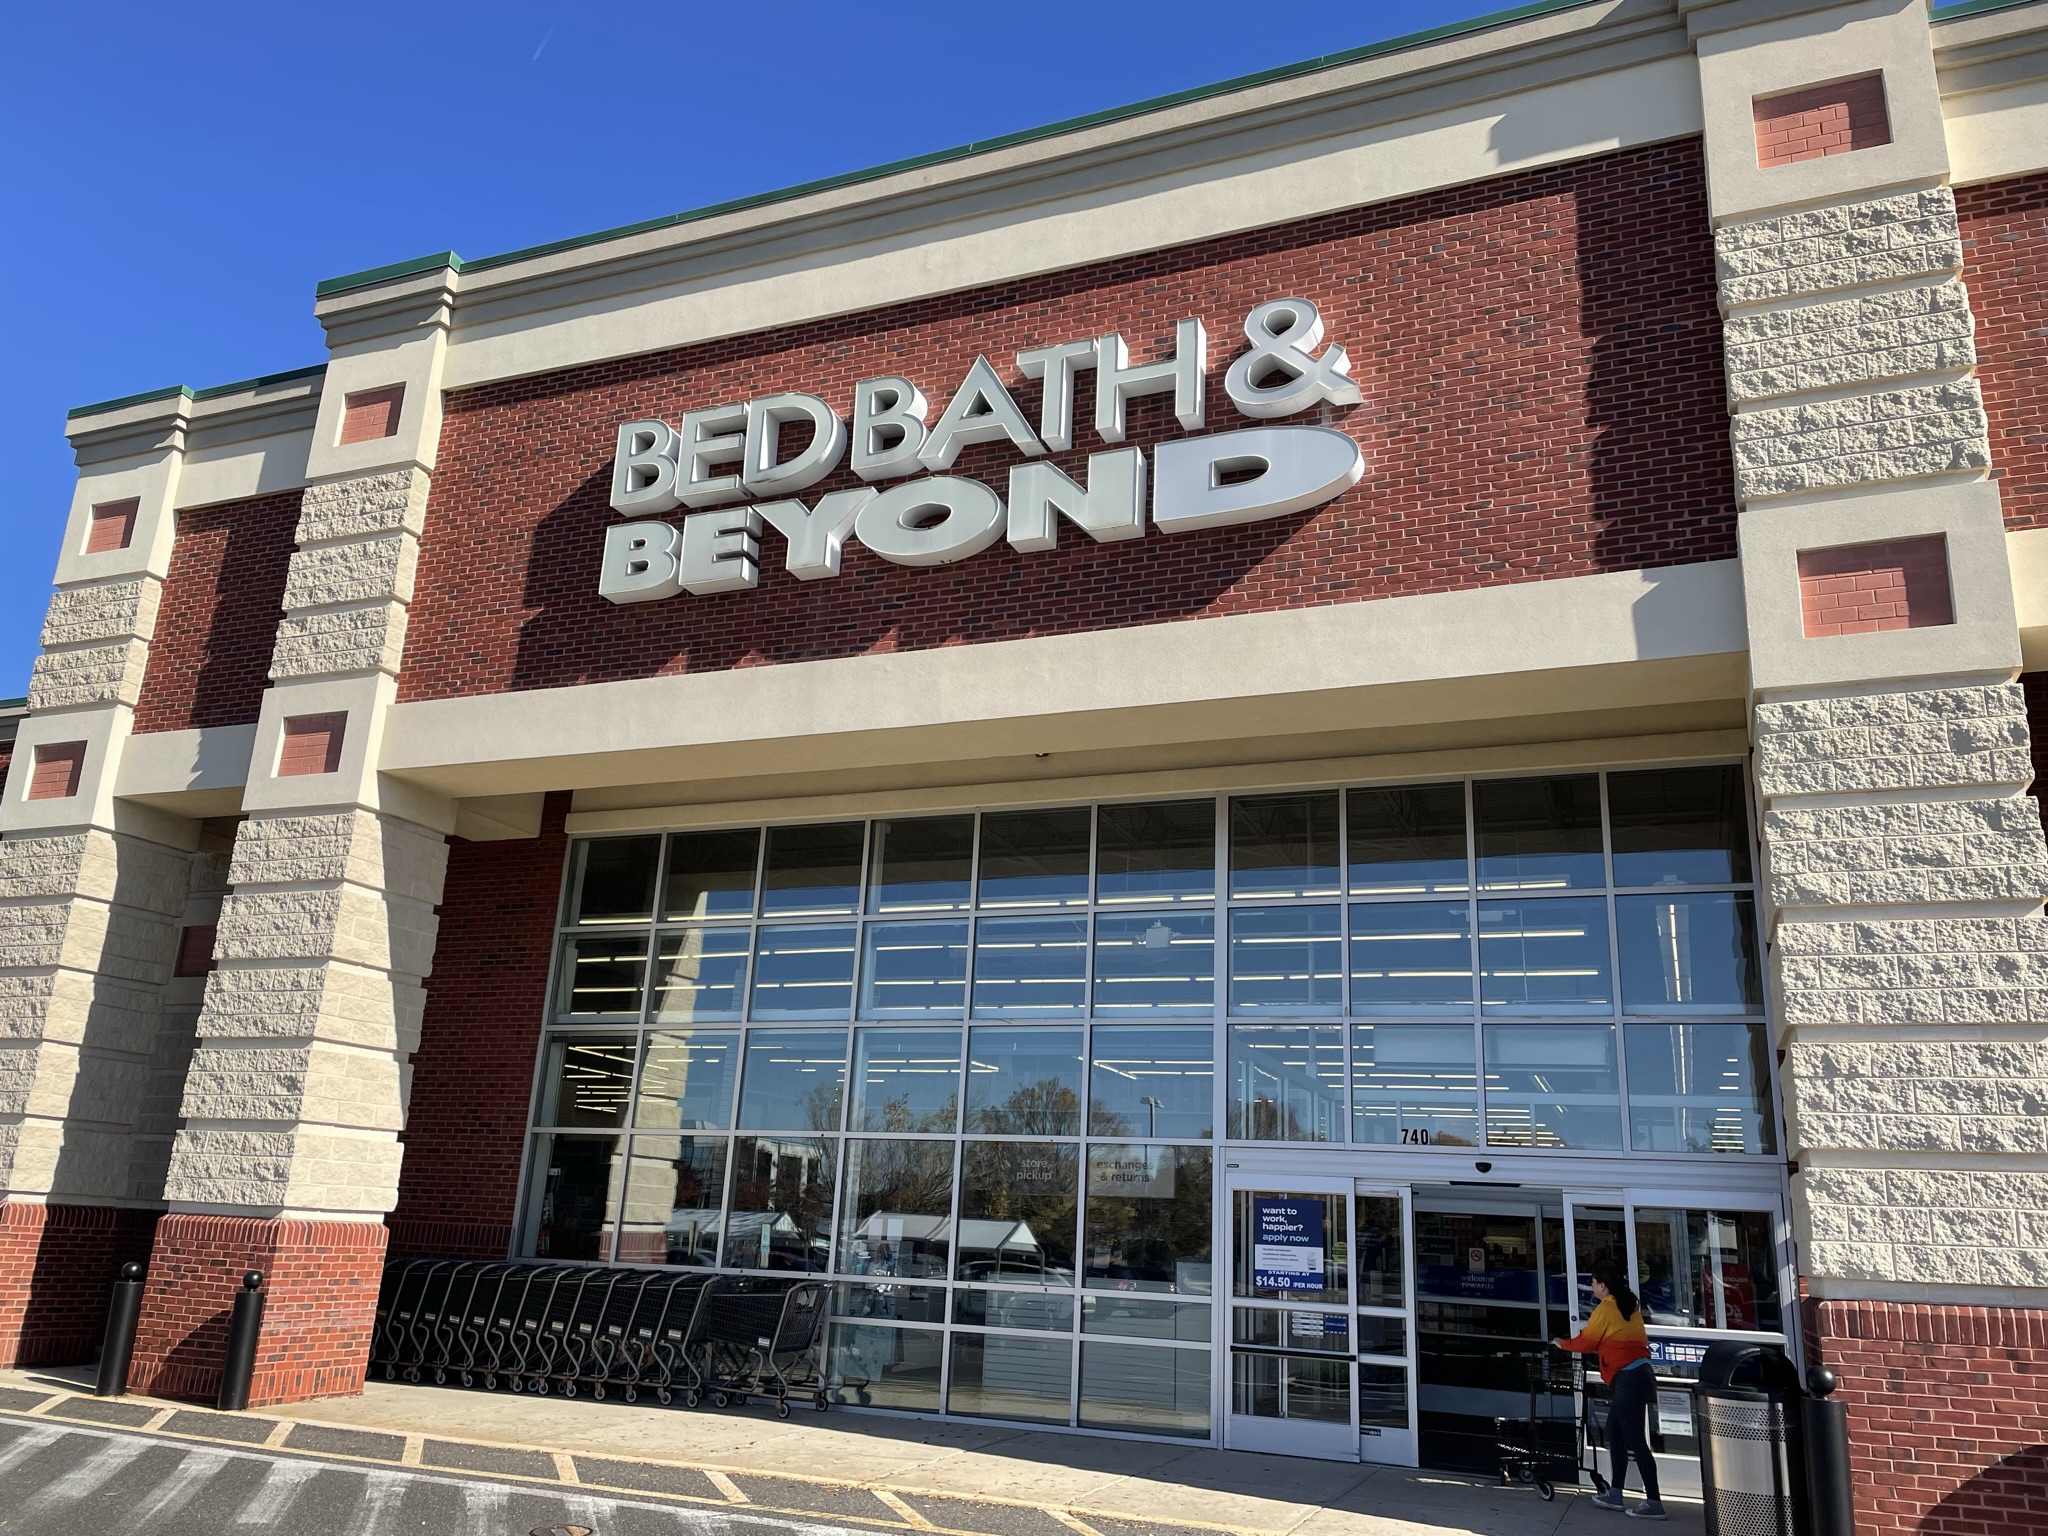 12 photos showing the sad state of Bed Bath & Beyond